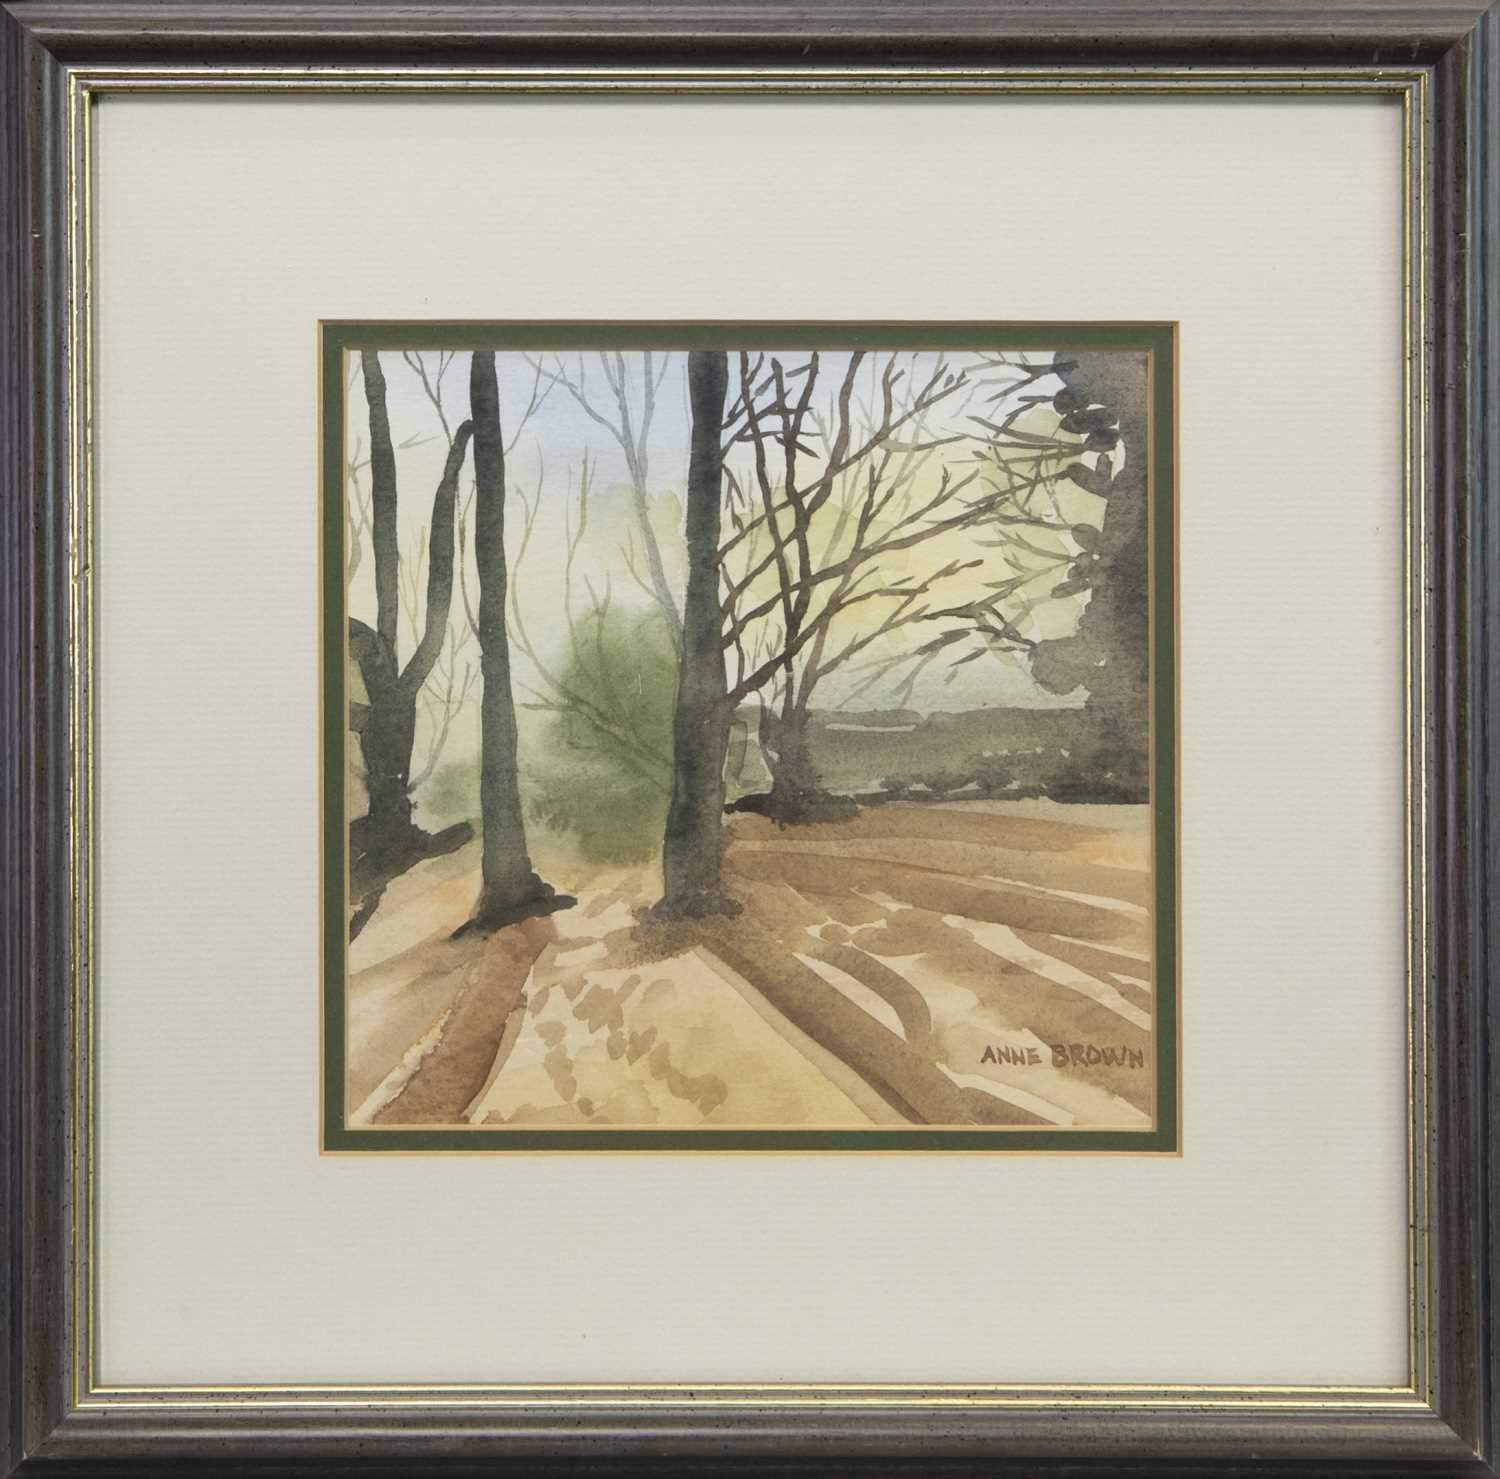 Lot 411 - WOODLAND SCENE I, A WATERCOLOUR BY ANNE BROWN